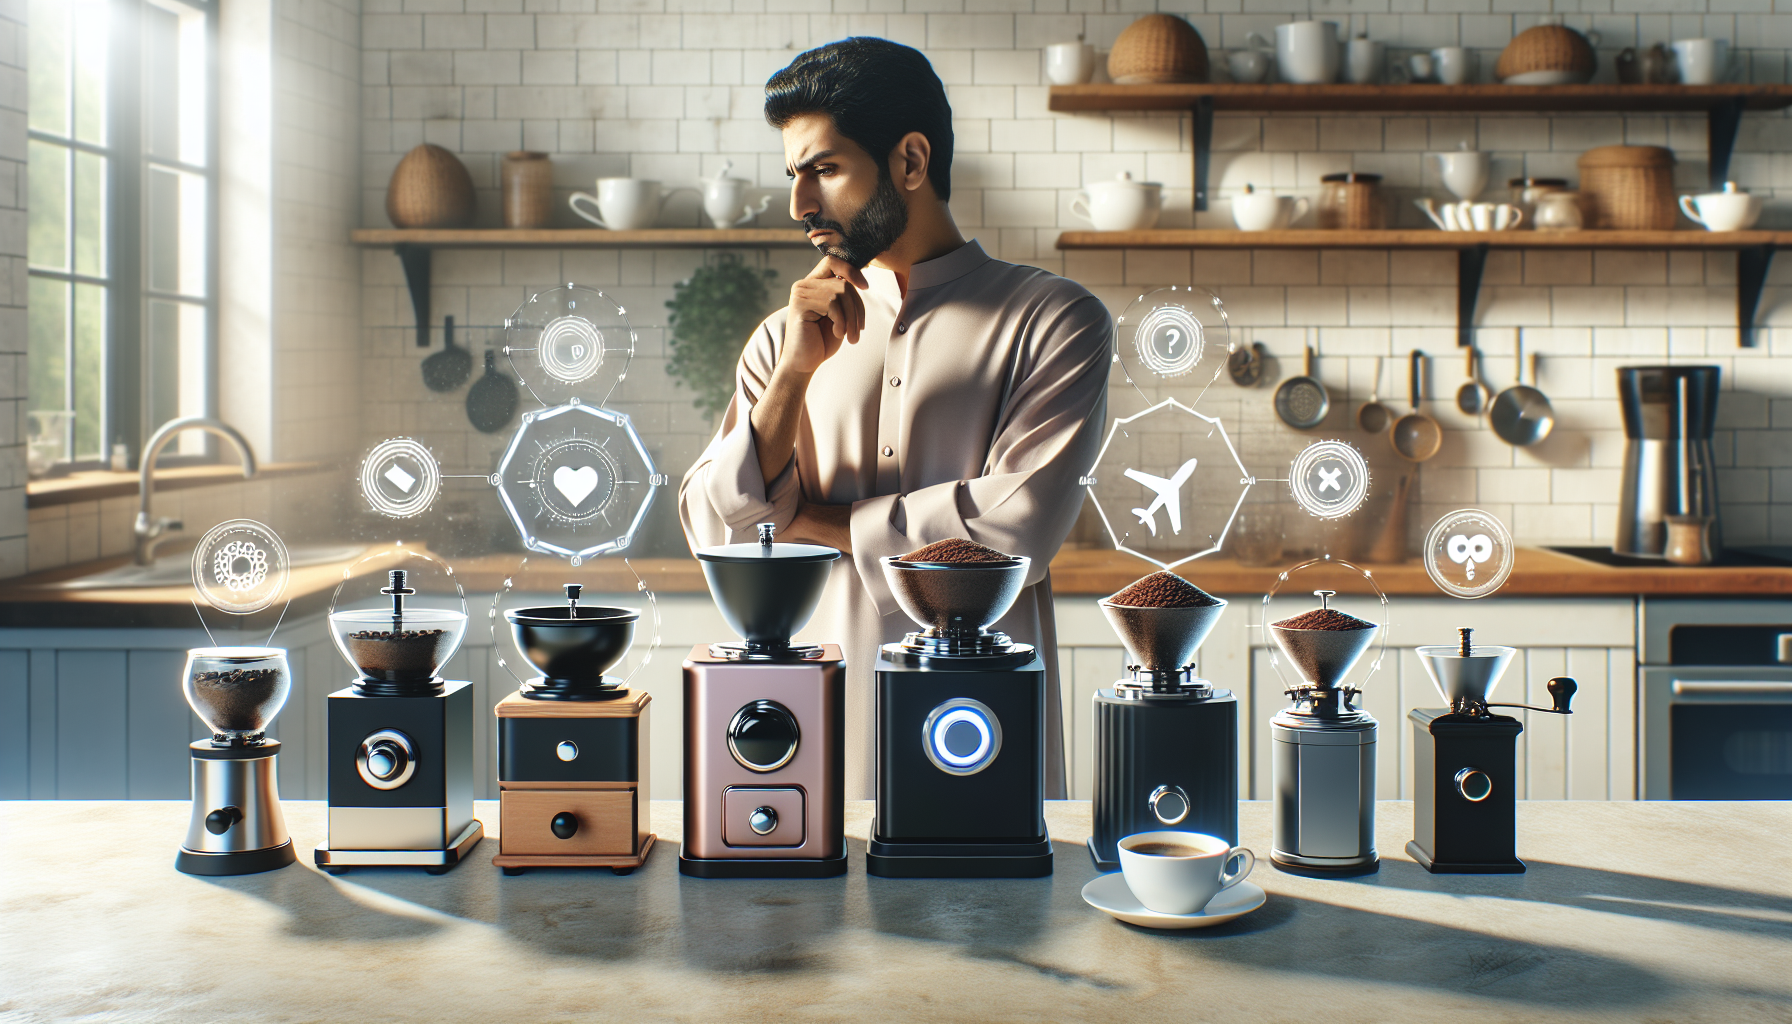 Selecting the ideal coffee grinder